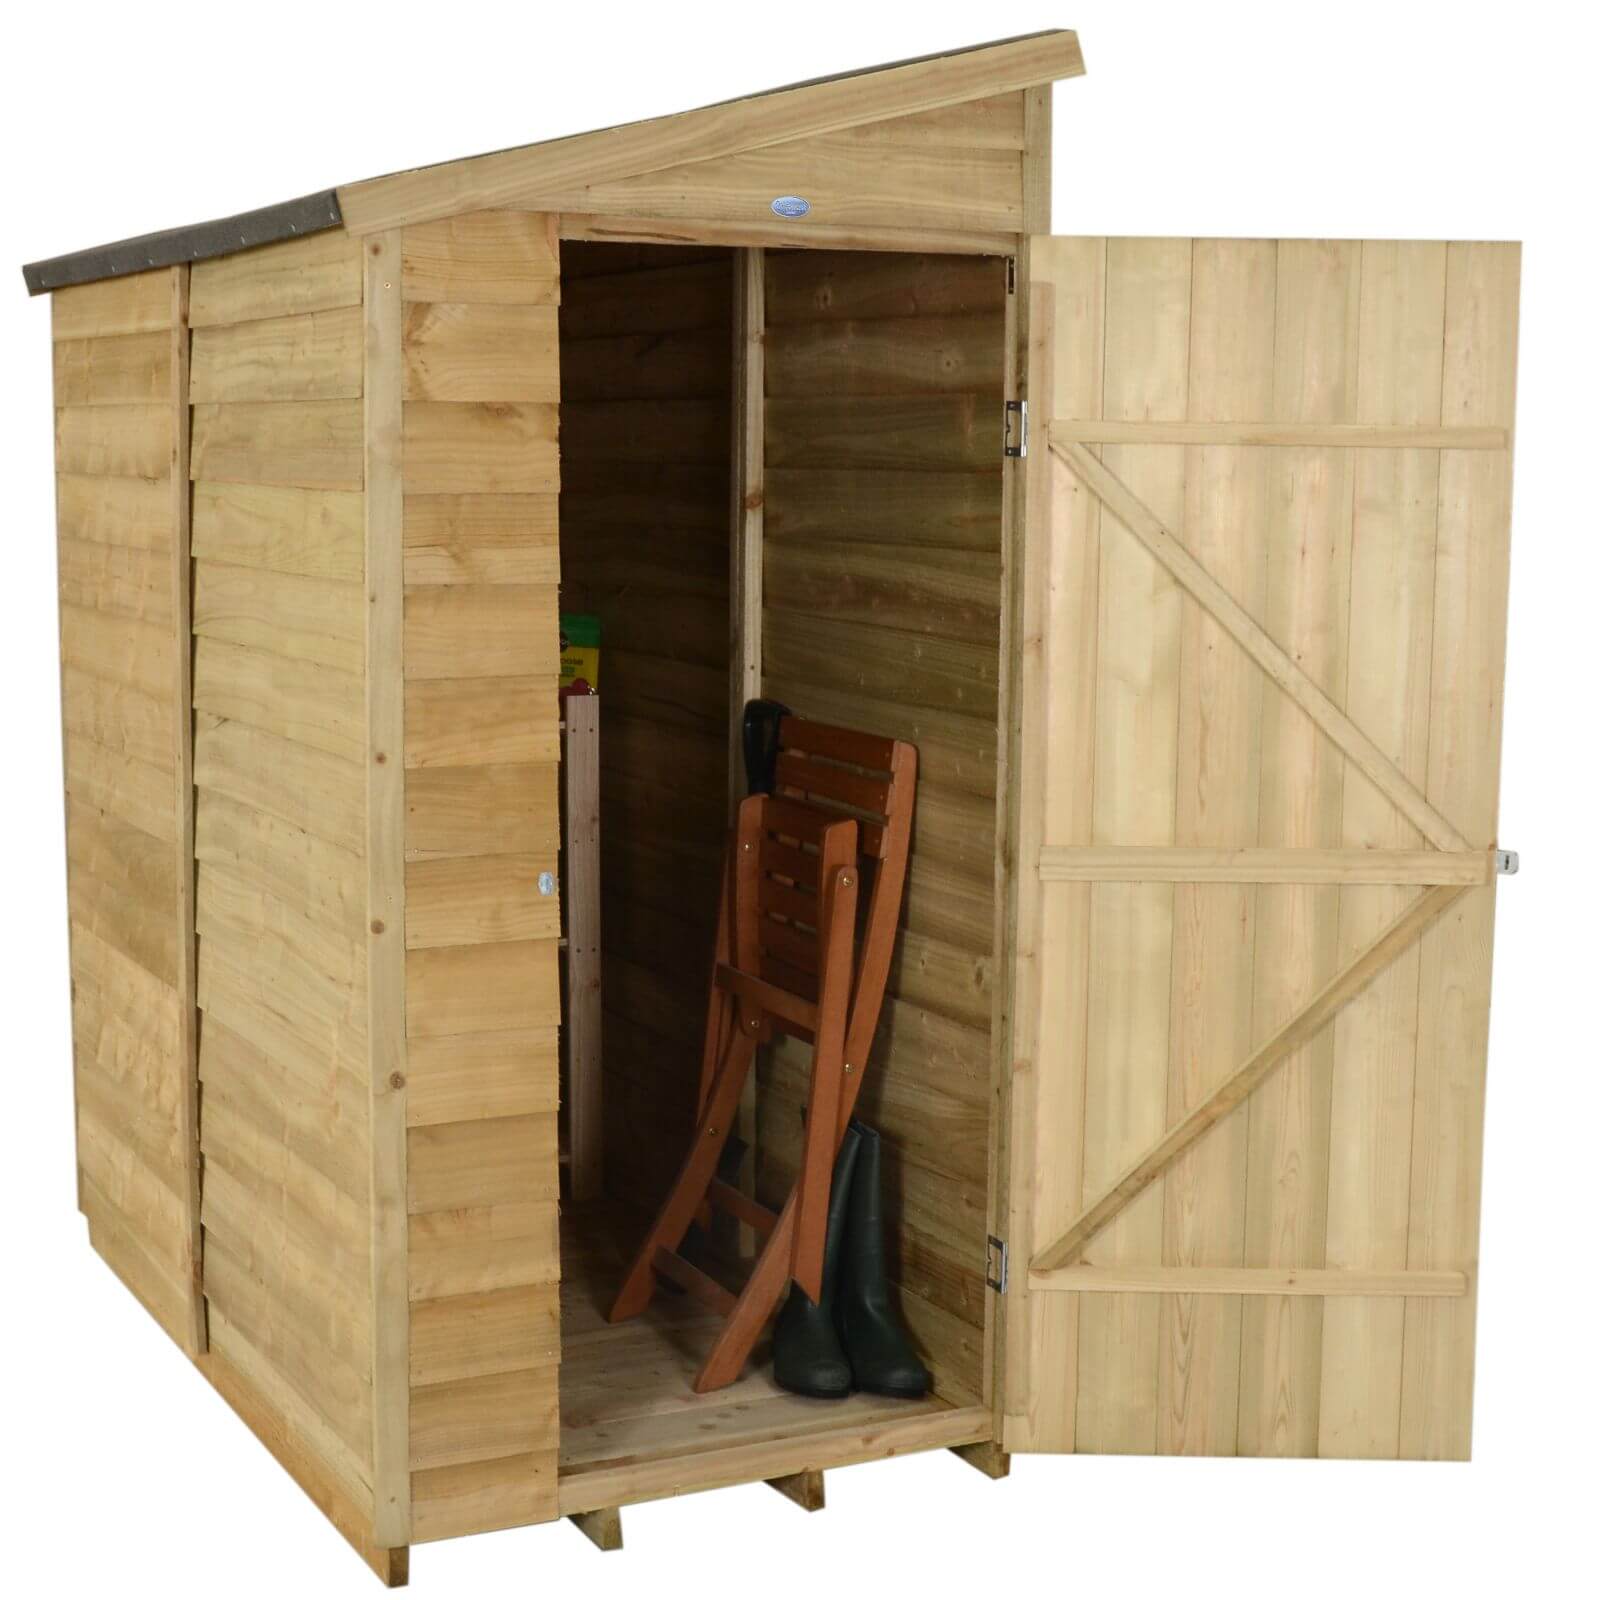 6x3ft Forest Overlap Pent Wooden Shed